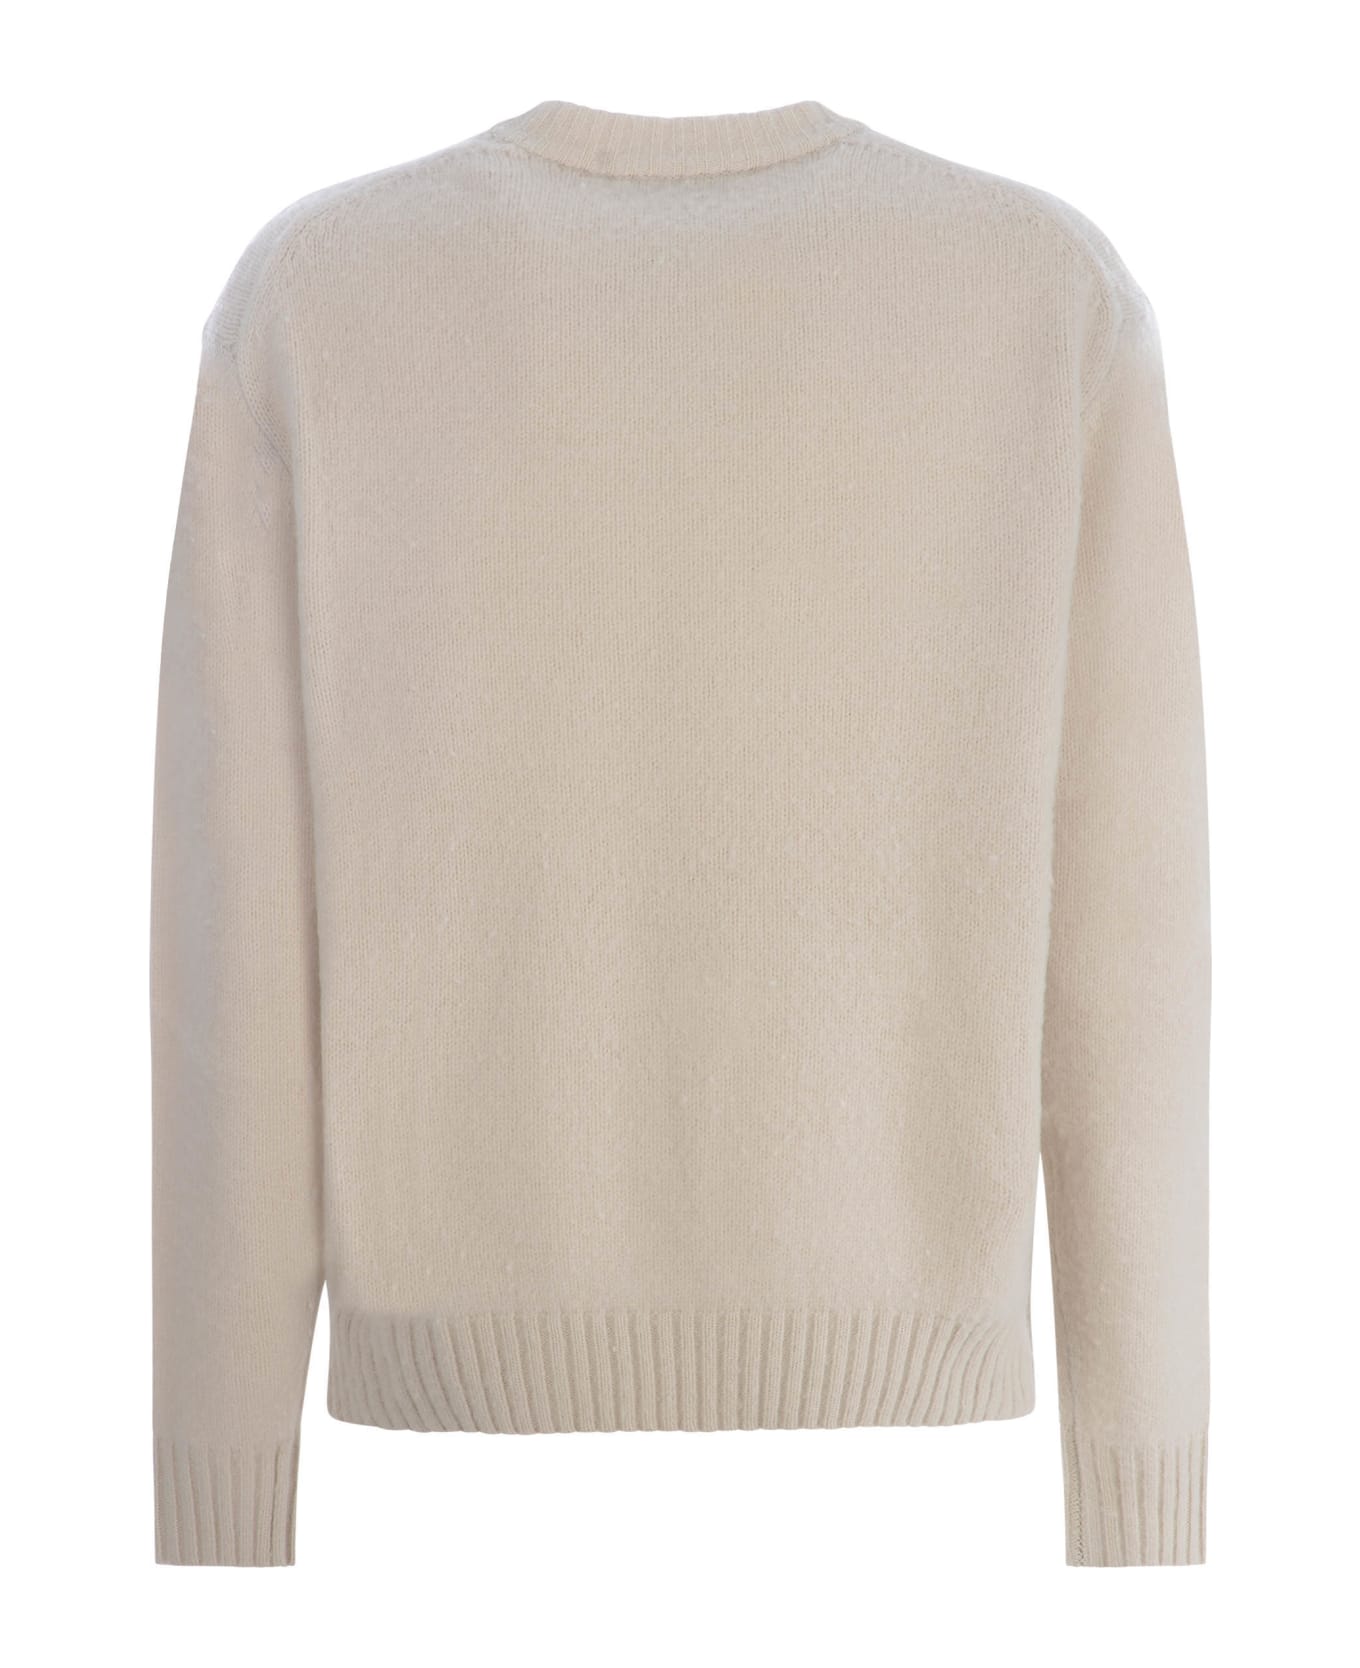 Axel Arigato Sweater Axel Arigato "clay" In Wool And Cashmere Blend - Beige chiaro